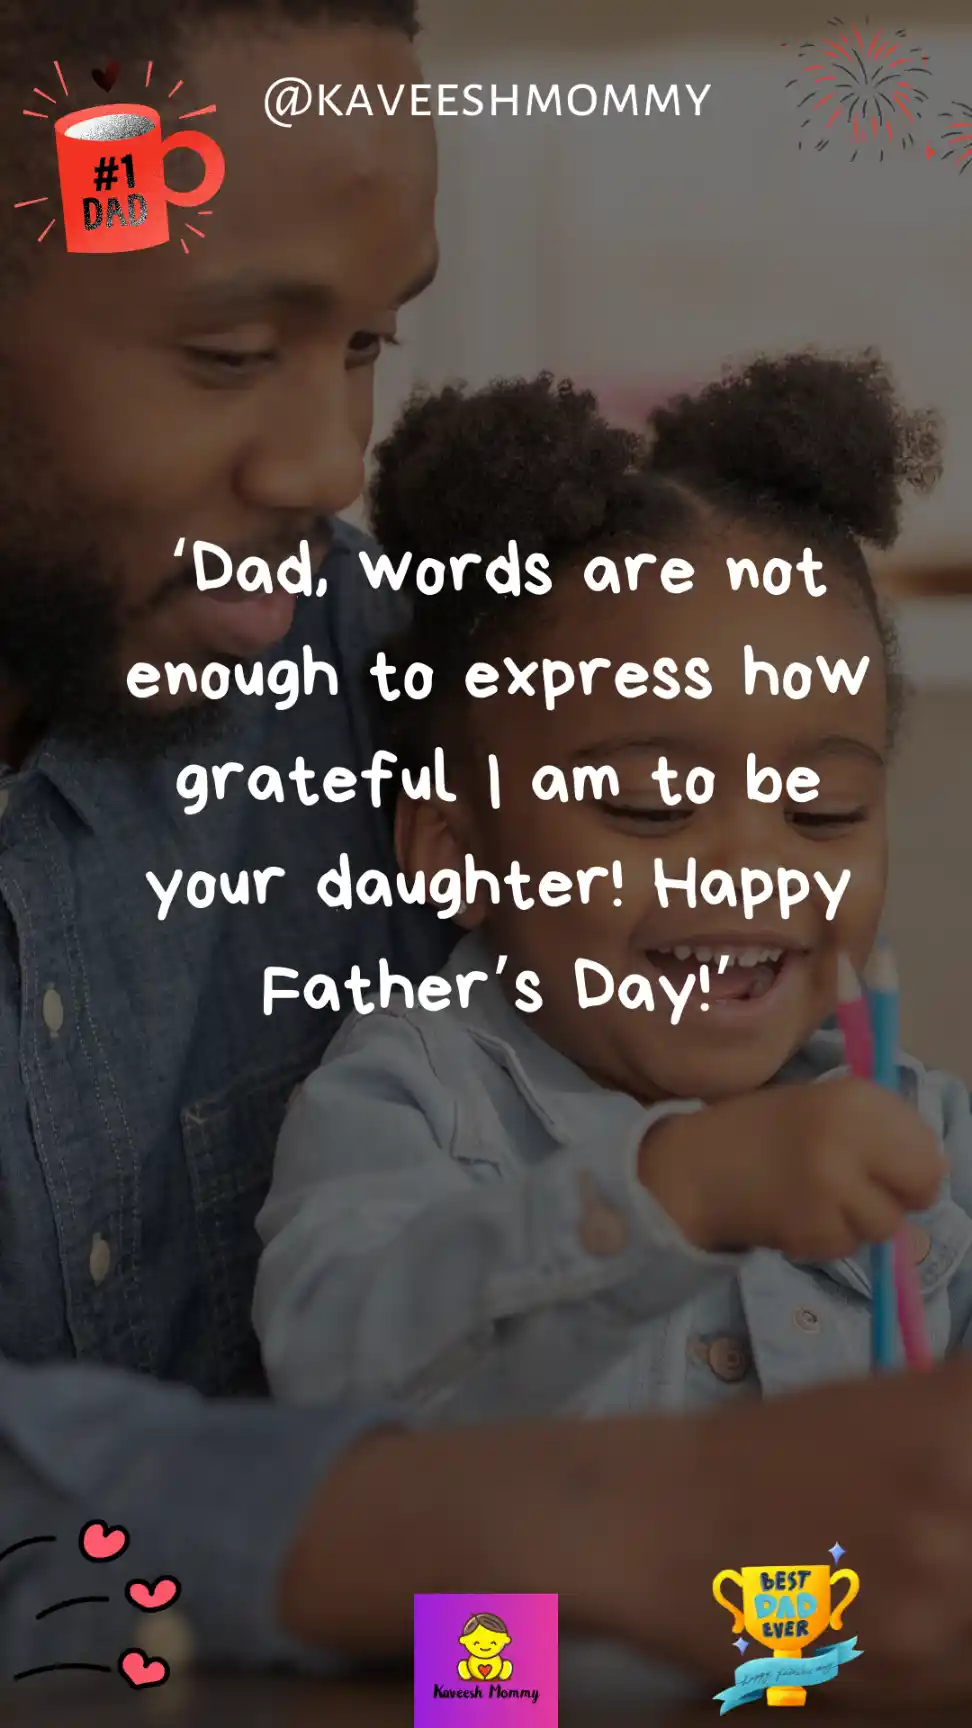 father's day special for daughter-Dad, words are not enough to express how grateful I am to be your daughter! Happy Father’s Day!’